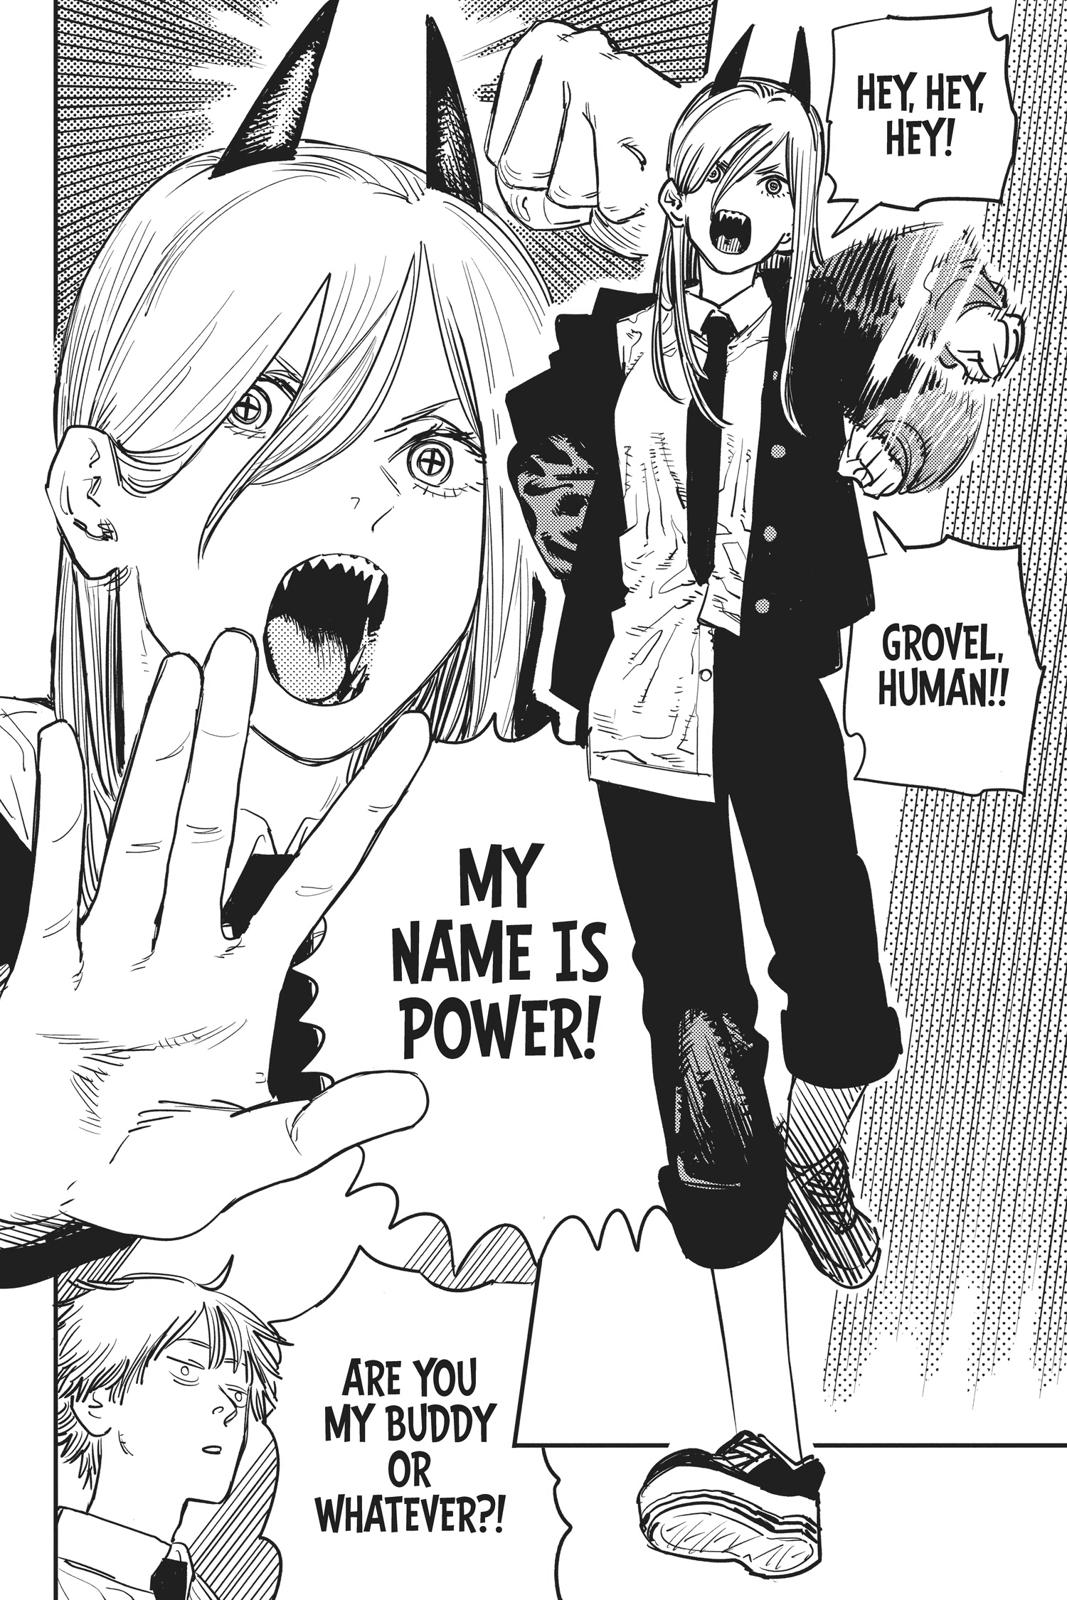 read chainsaw man manga chapter 4 Power online in high quality